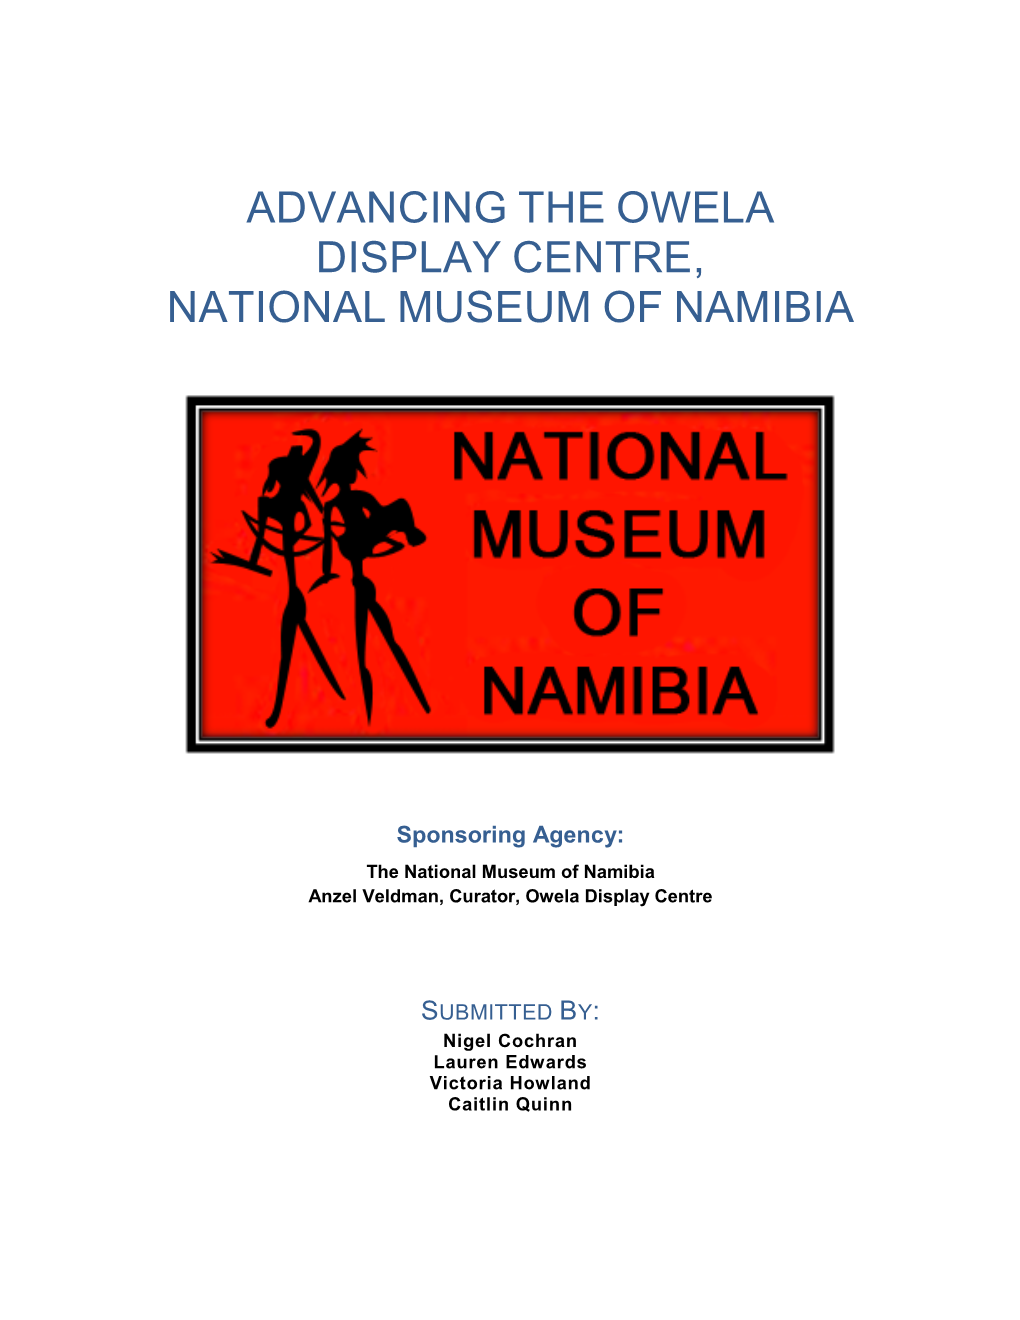 Advancing the Owela Display Centre, National Museum of Namibia